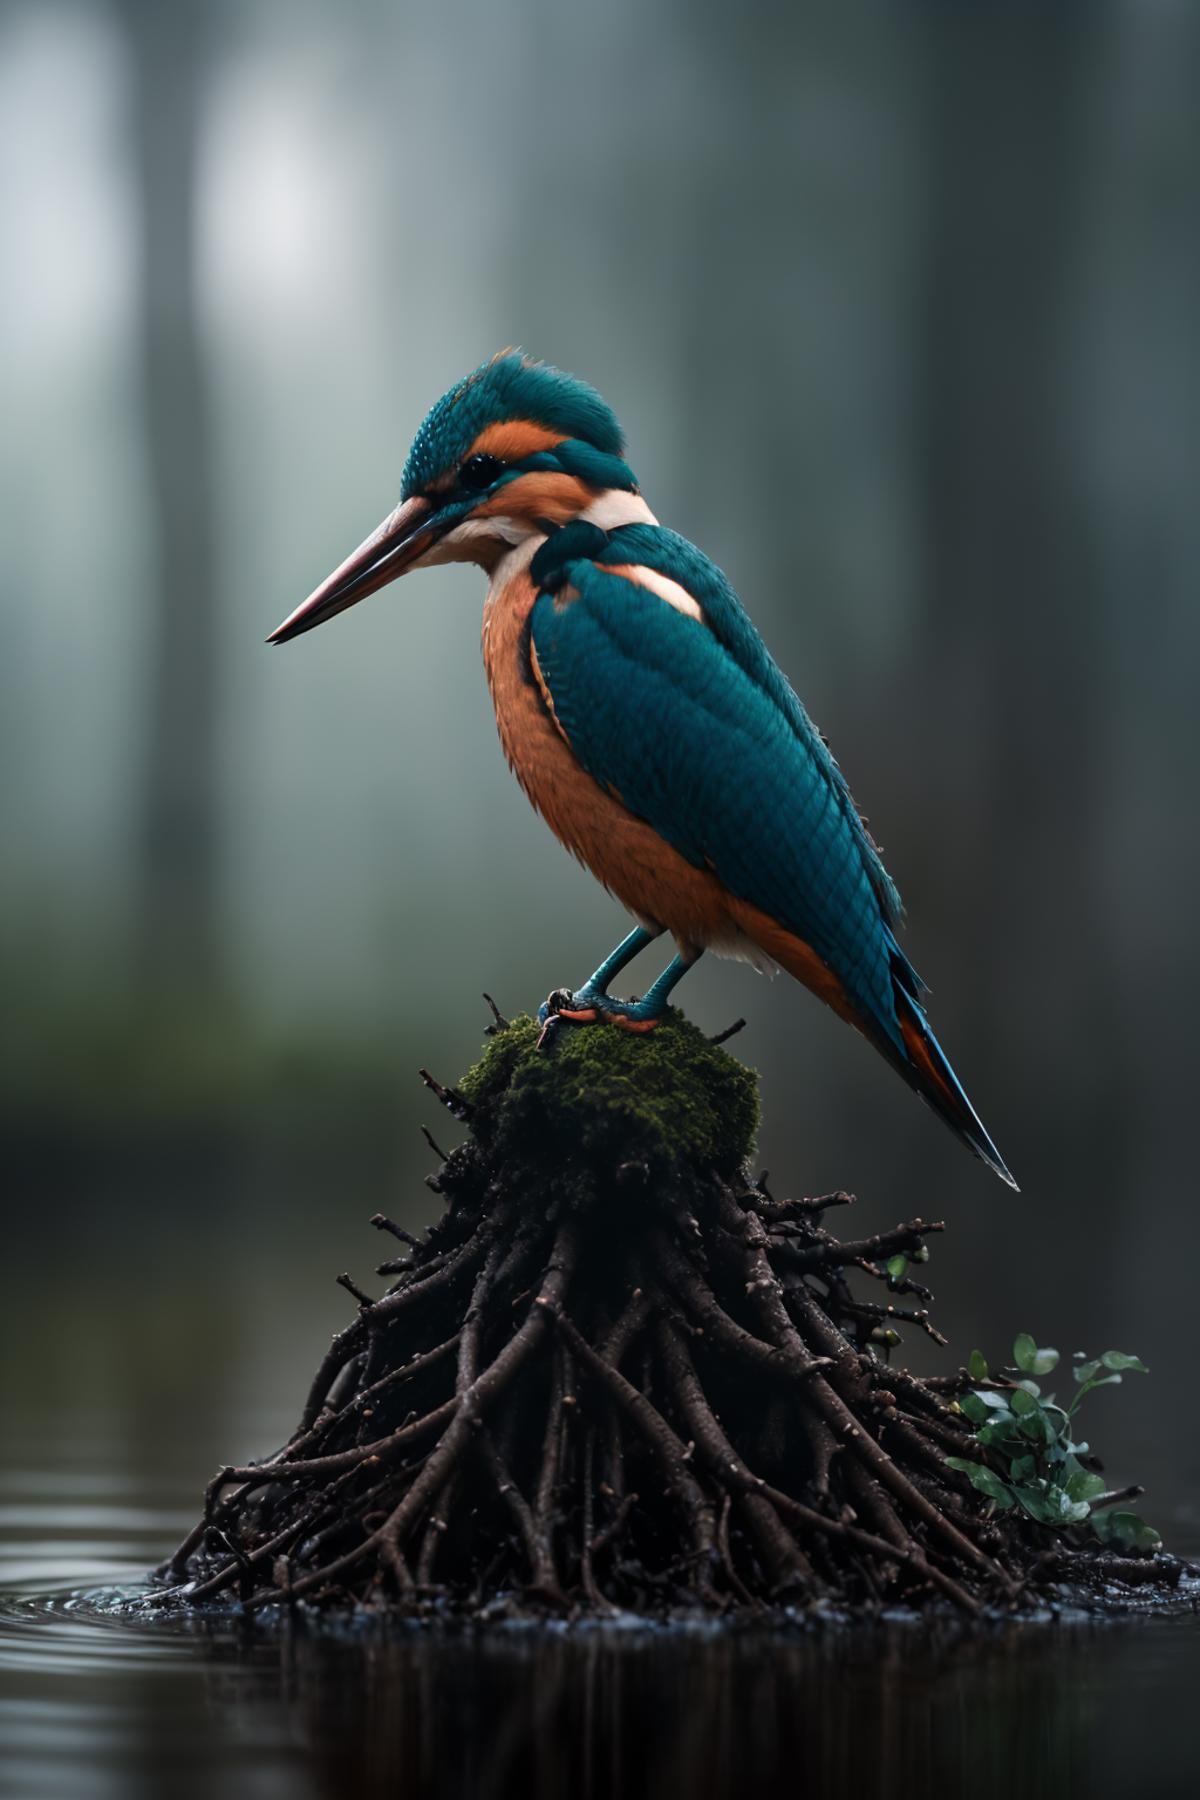 A bird with blue and orange feathers perched on a tree branch.